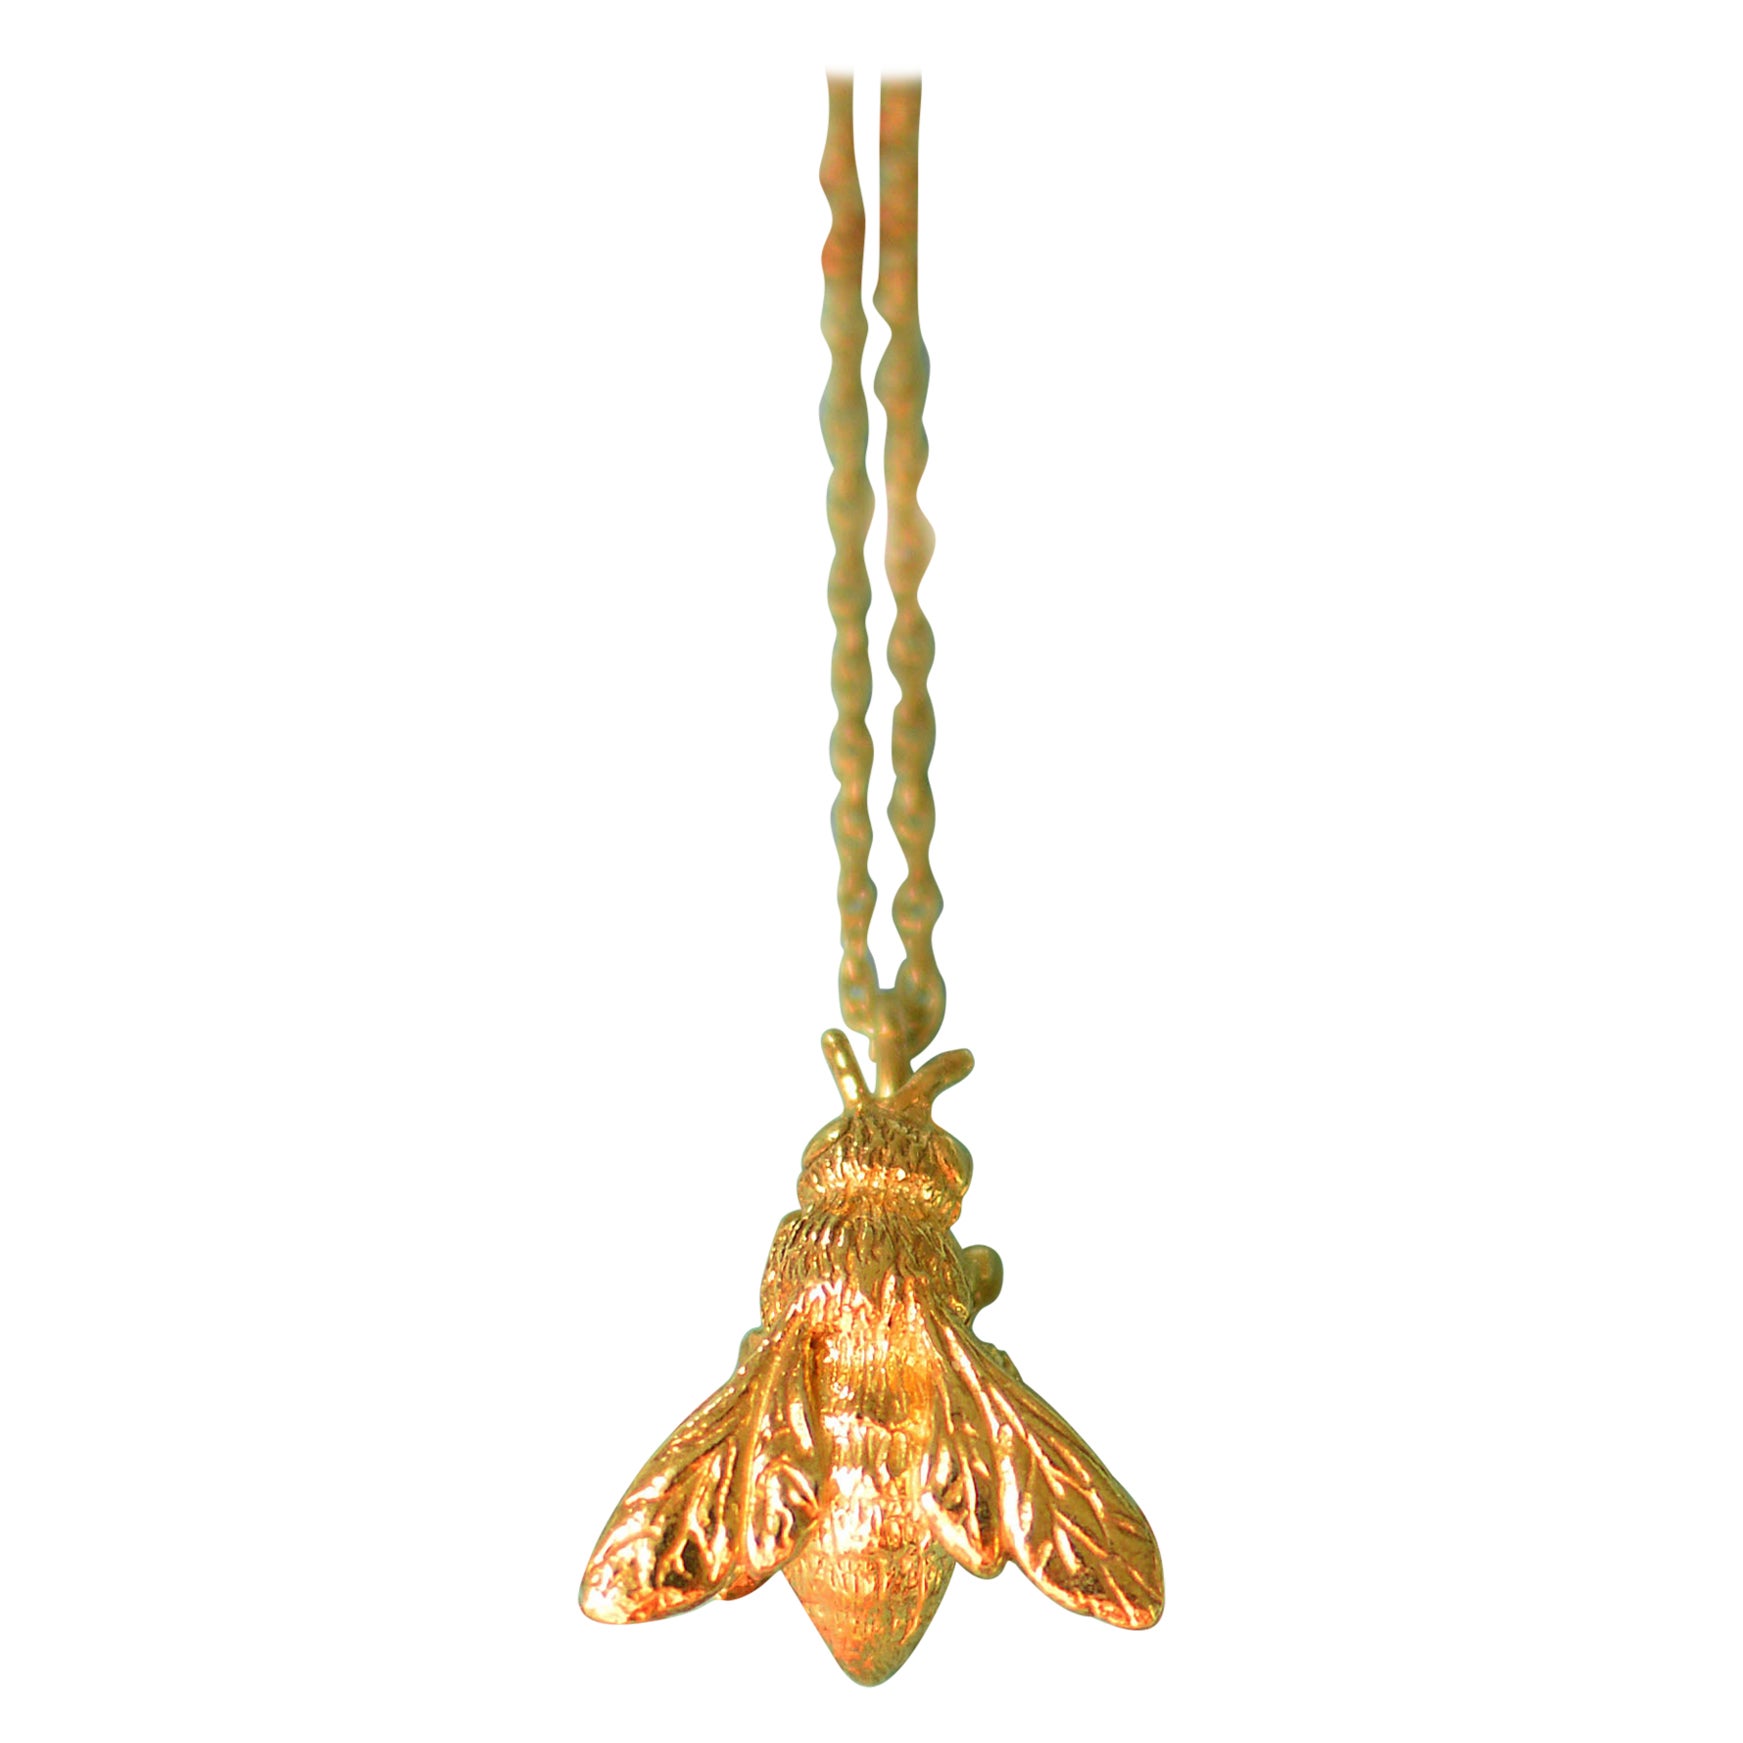 Solid 18 Carat Gold Honey Bee Pendant by Lucy Stopes-Roe